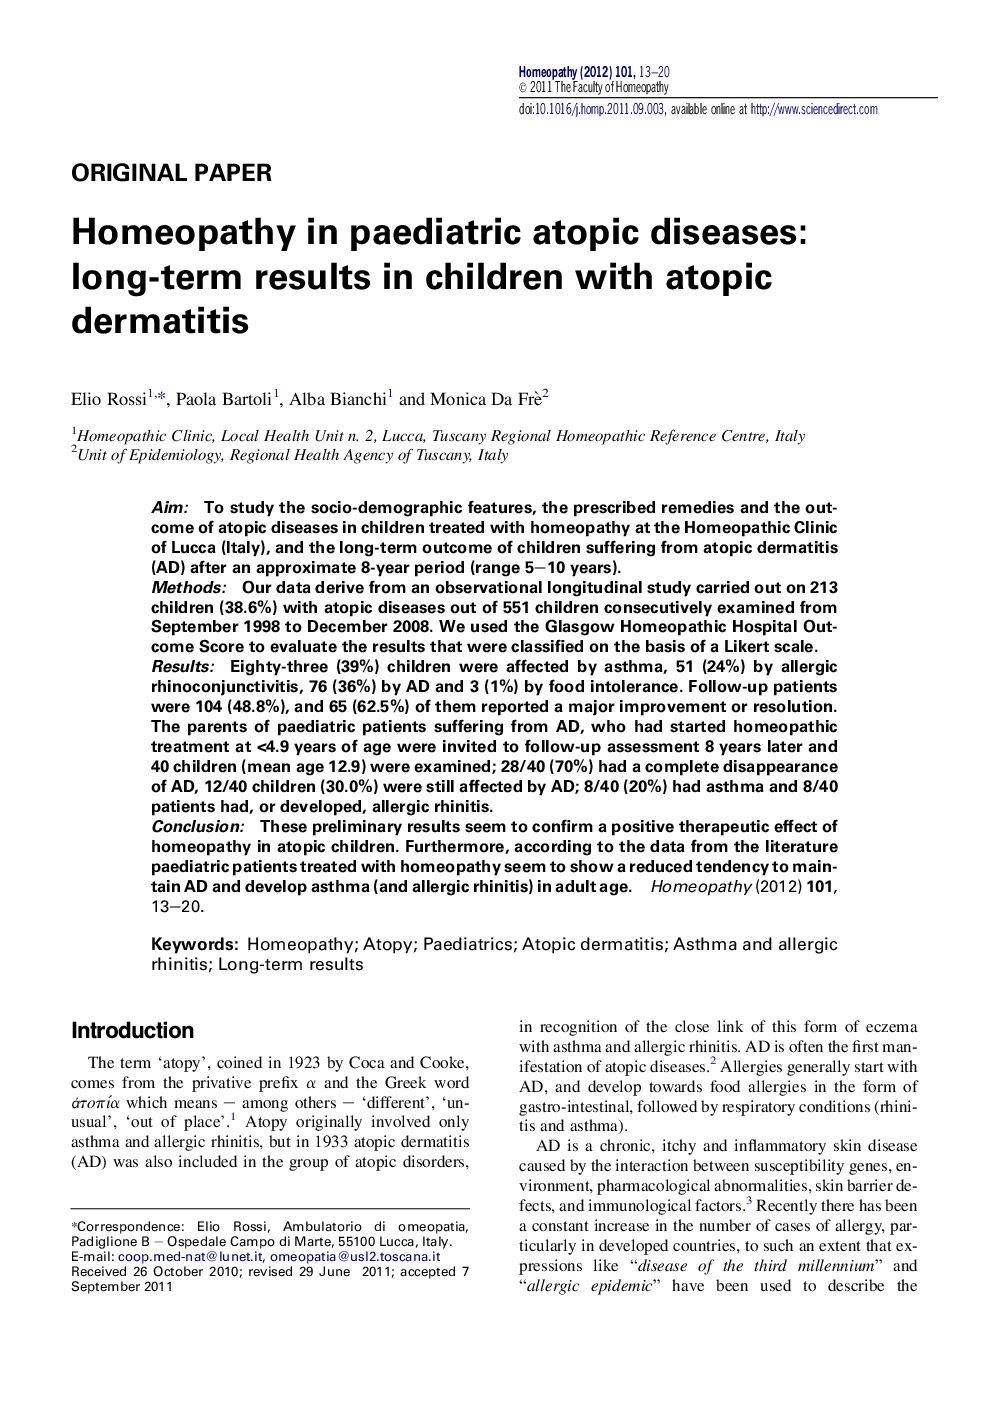 Homeopathy in paediatric atopic diseases: long-term results in children with atopic dermatitis